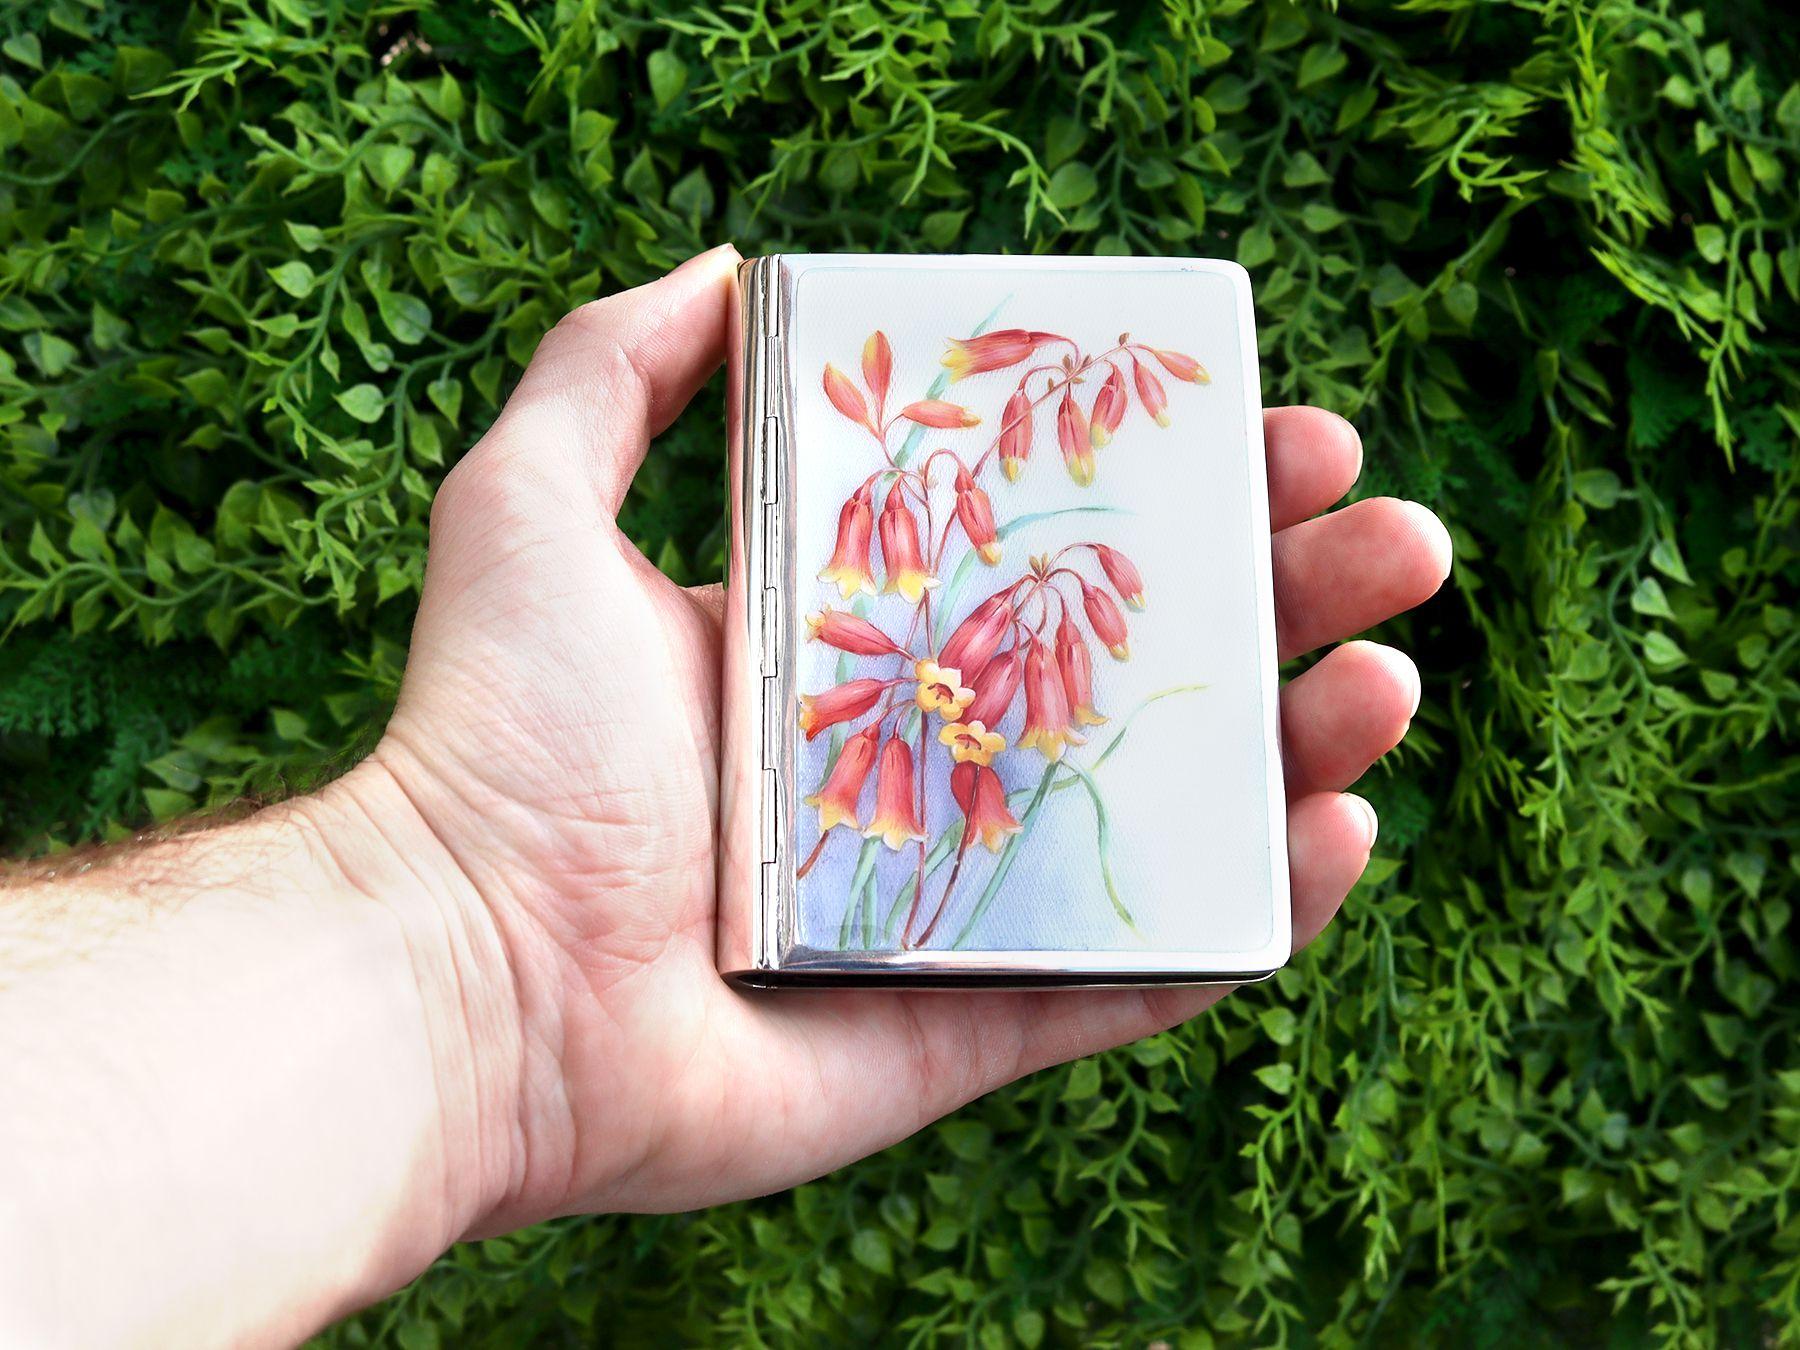 A fine vintage German silver and enamel card case; part of our boxes and cases collection.

This fine German vintage card case has a rectangular book shaped form.

The anterior surface of this vintage card case is embellished with a hand painted